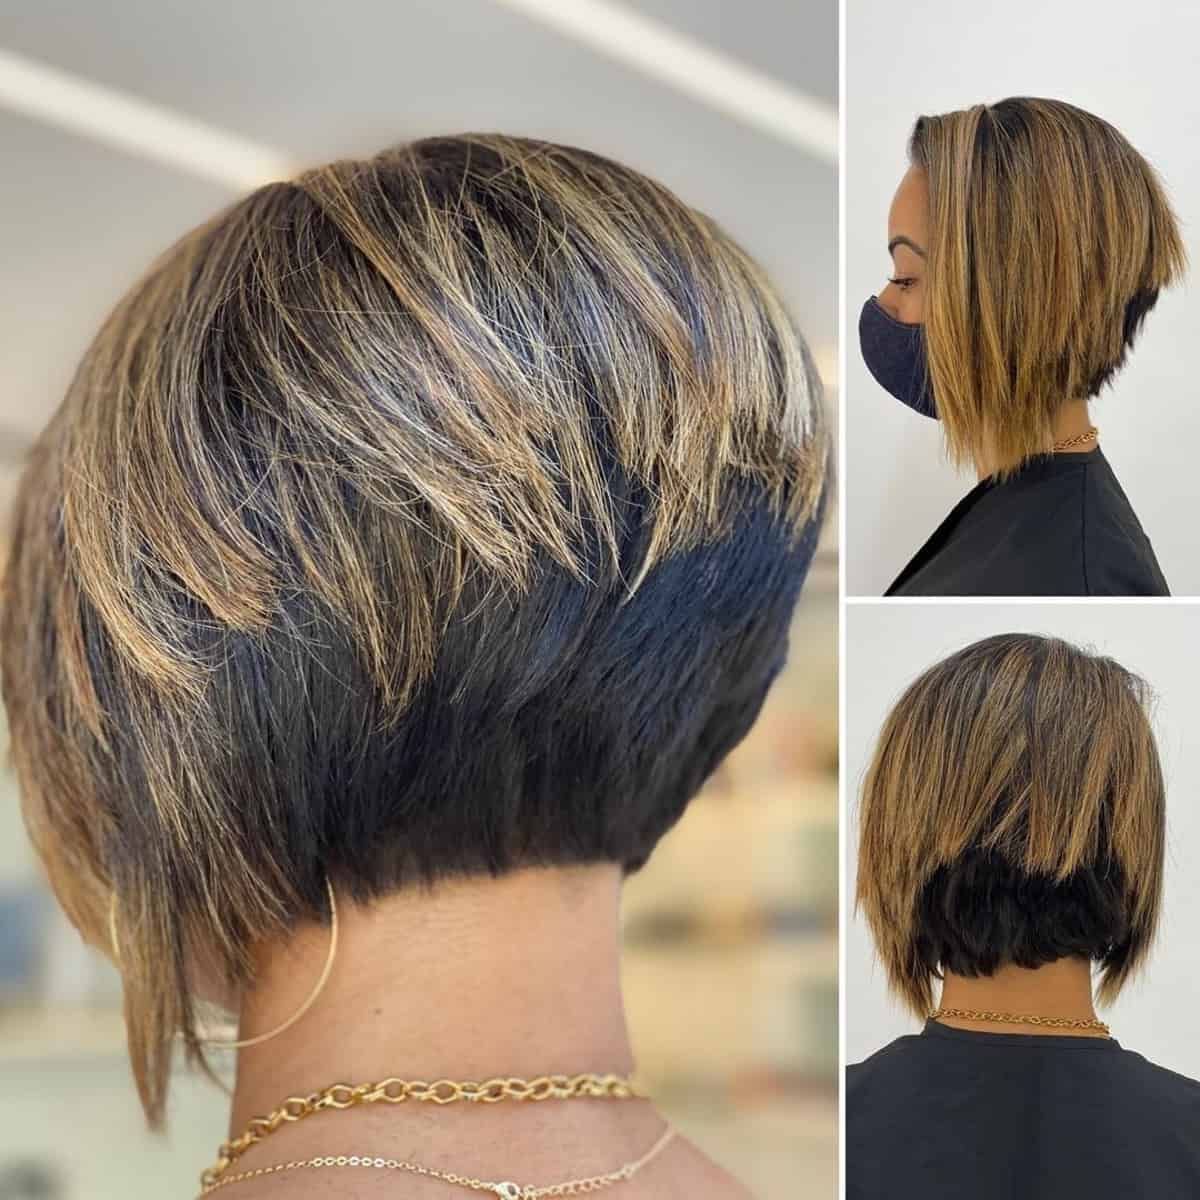 Top 16 Short Inverted Bob Haircuts Trending In 2022 Throughout Angled Bob Short Hair Hairstyles (View 3 of 20)